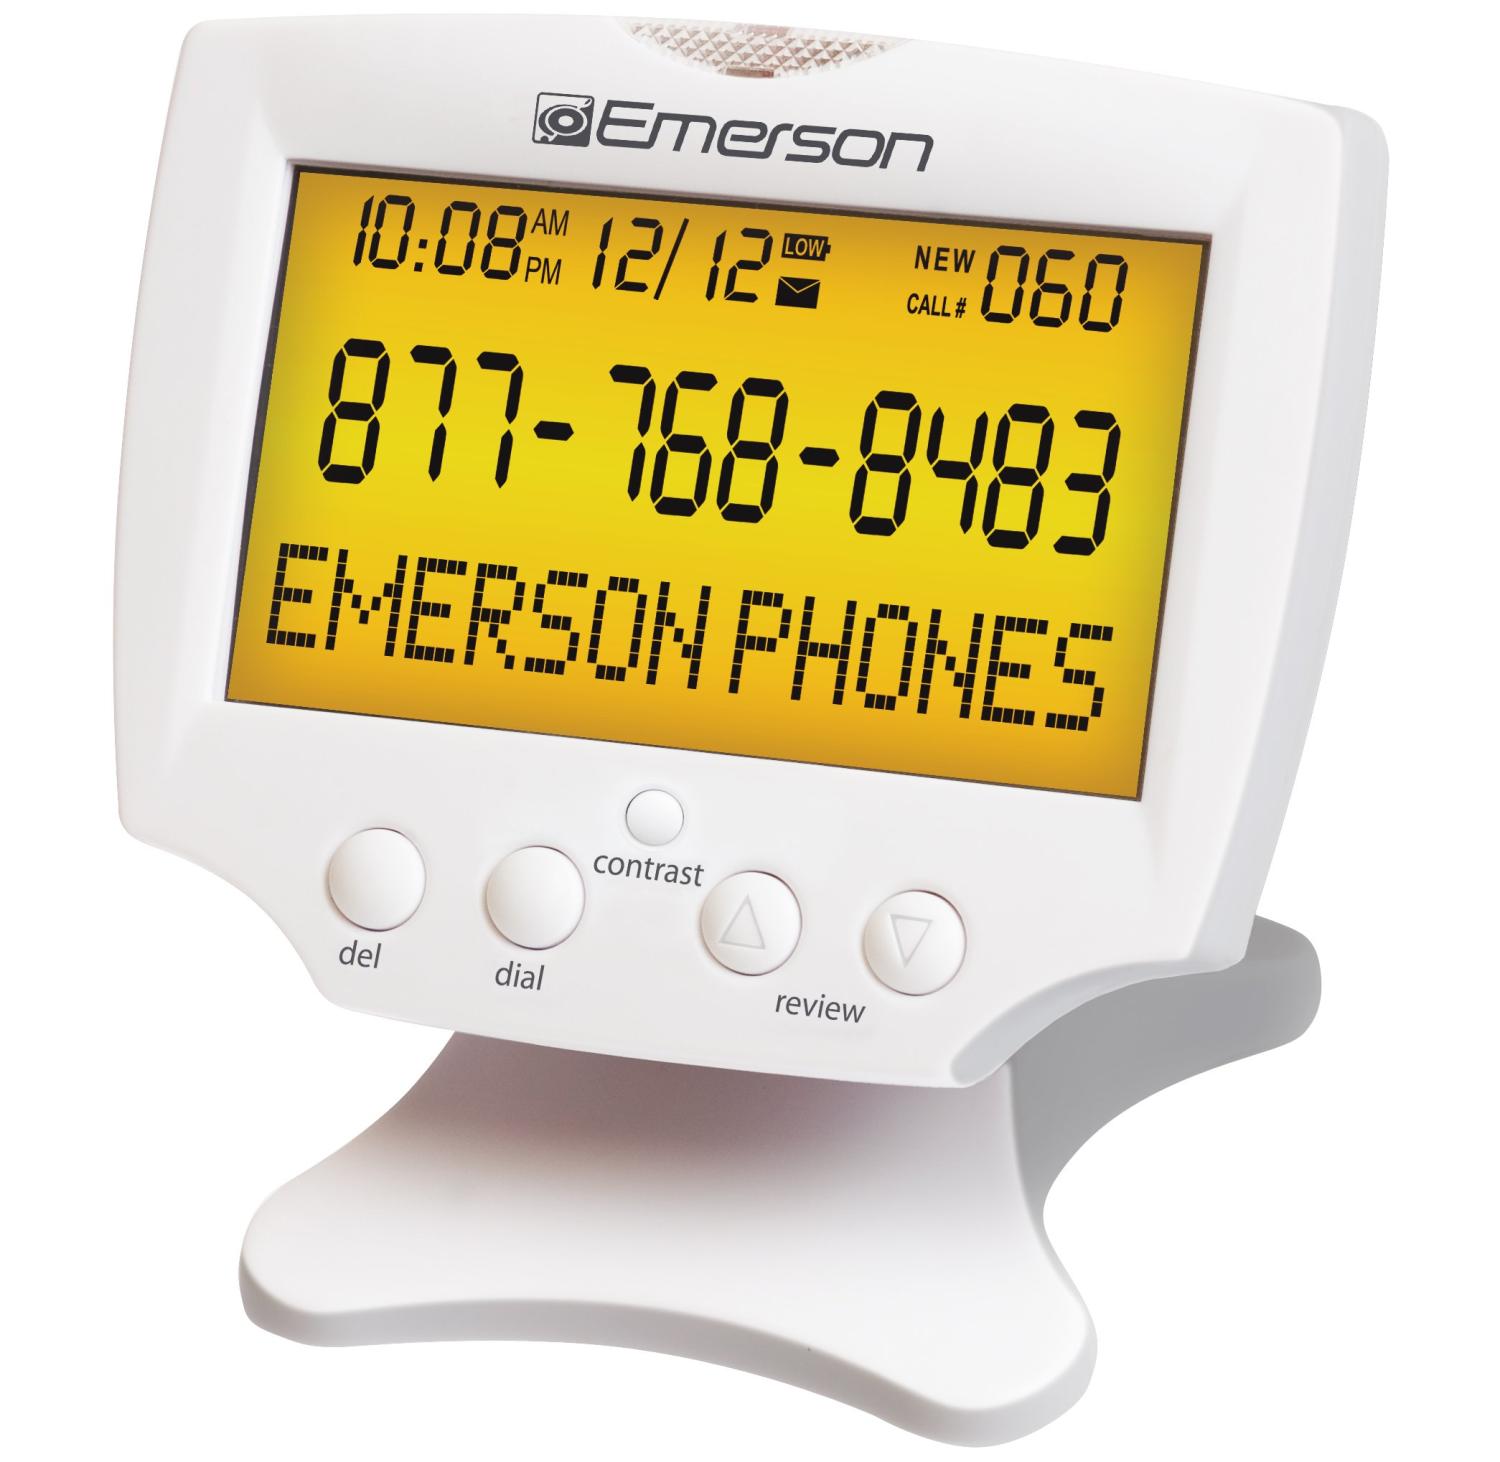 Emerson EM60 Large Display Talking Caller ID Box With 60 Numbers